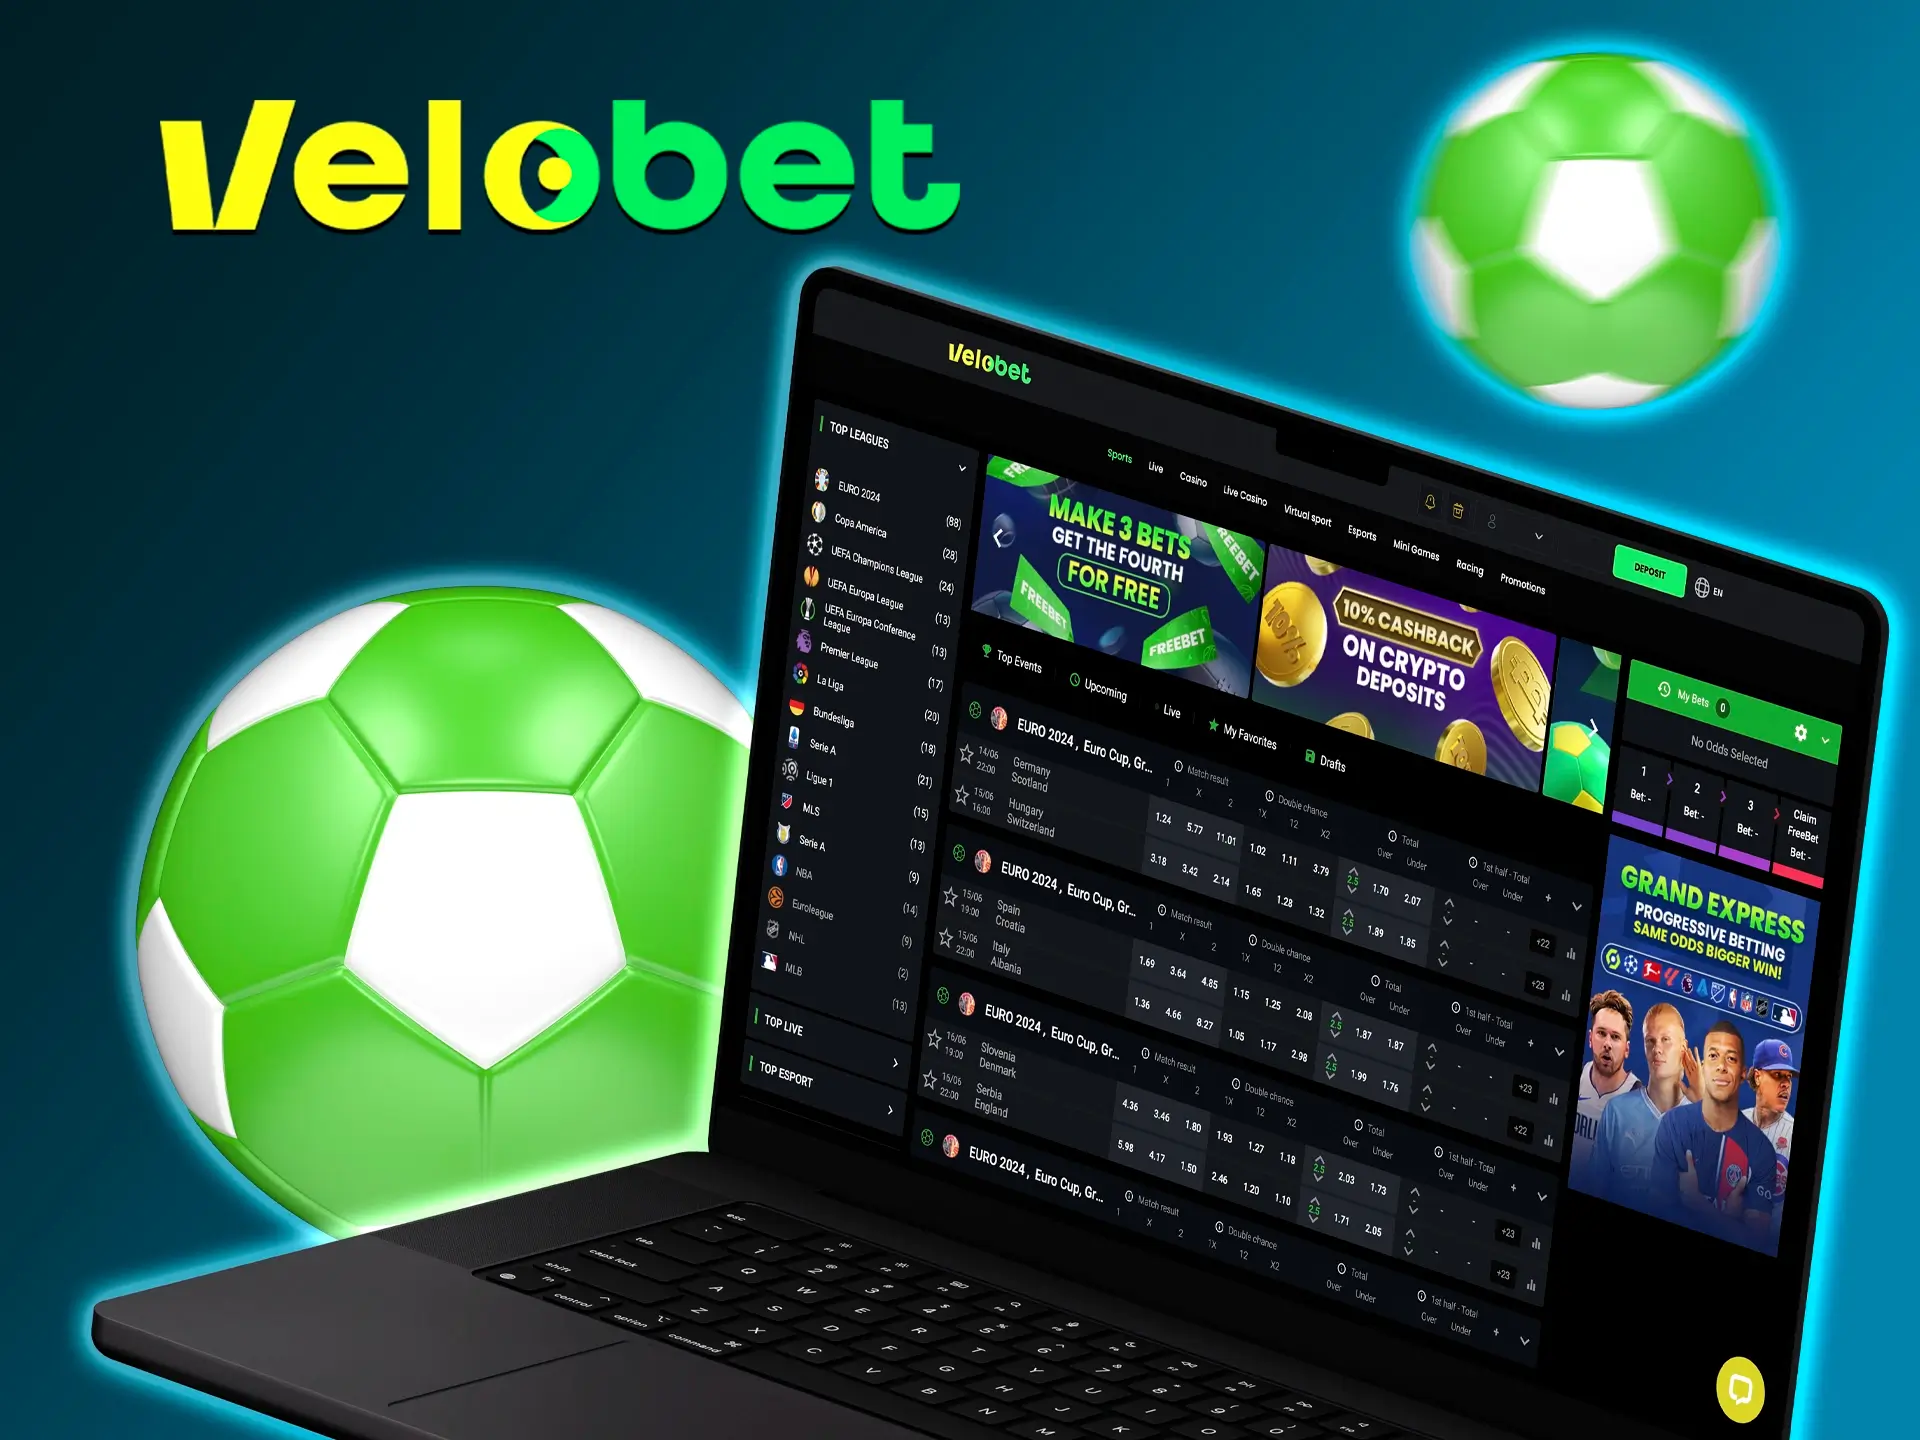 Velobet has the biggest and most popular football tournaments you can bet on.